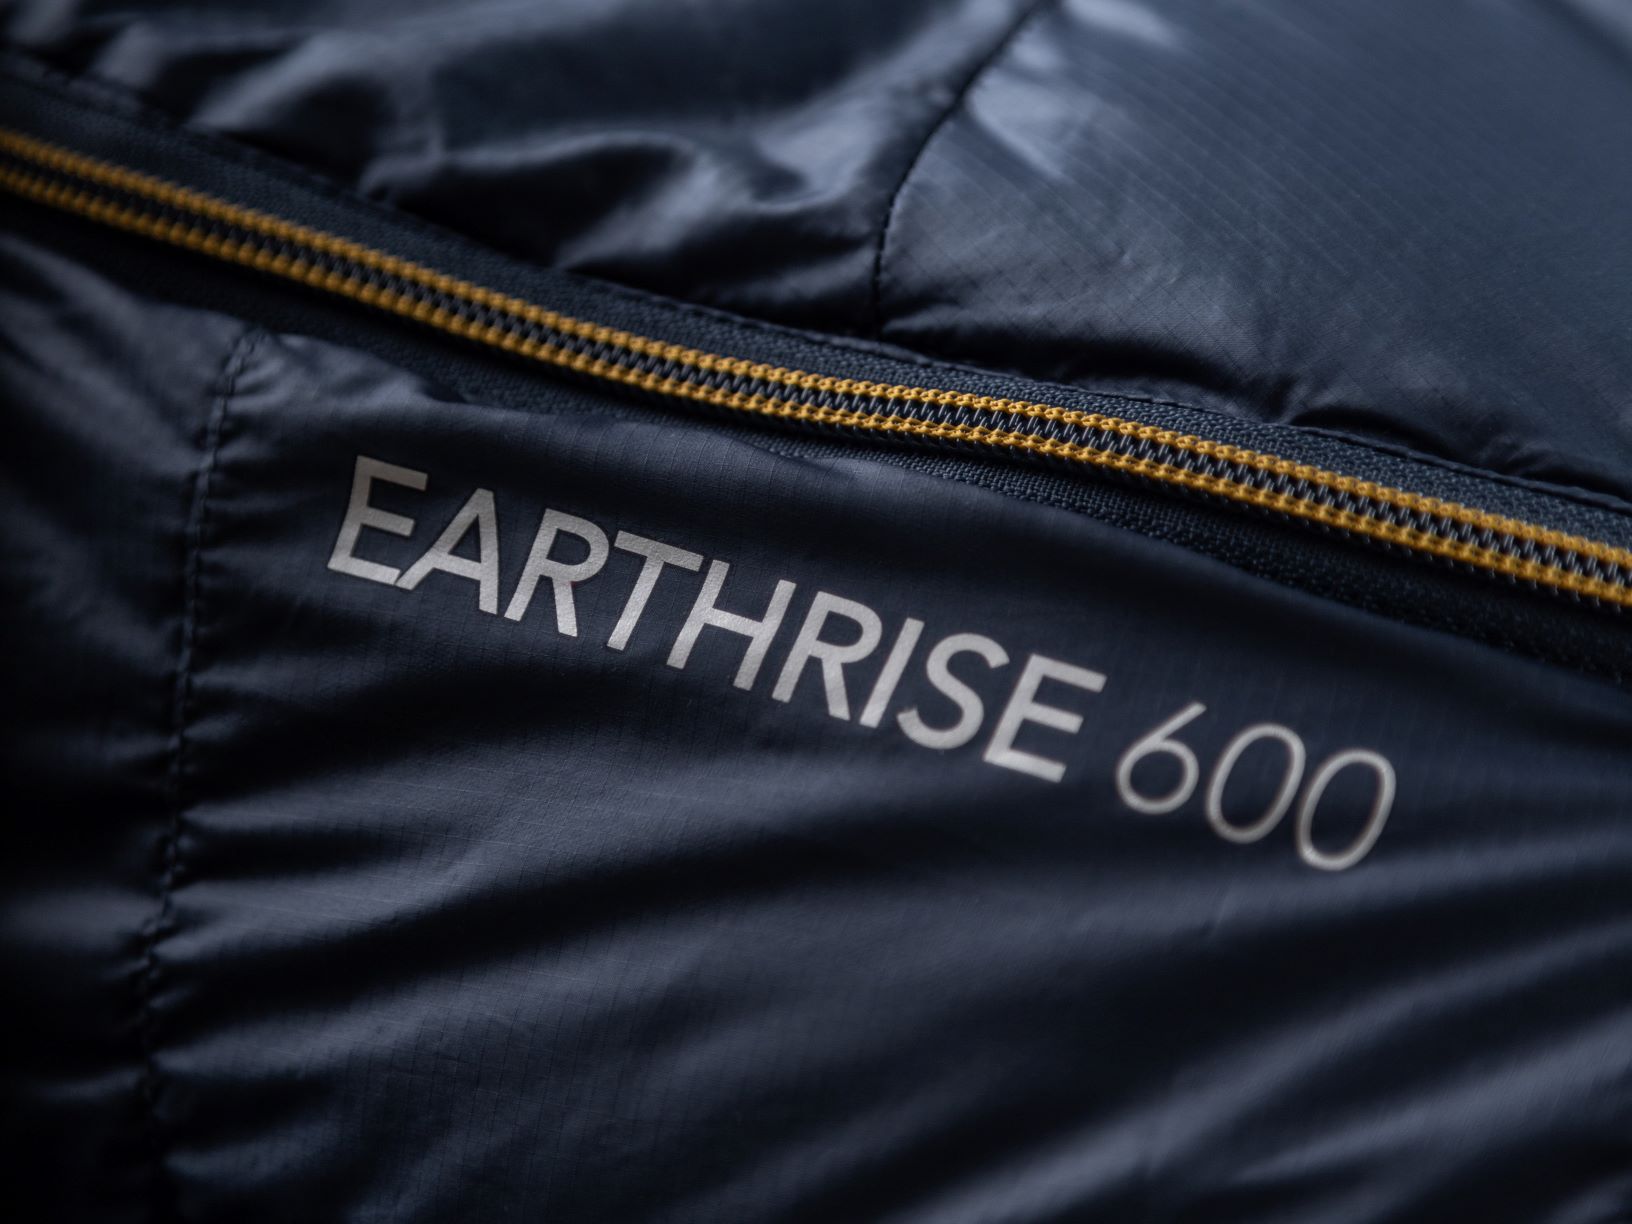 Earthrise Recycled Sleeping Bags from Mountain Equipment